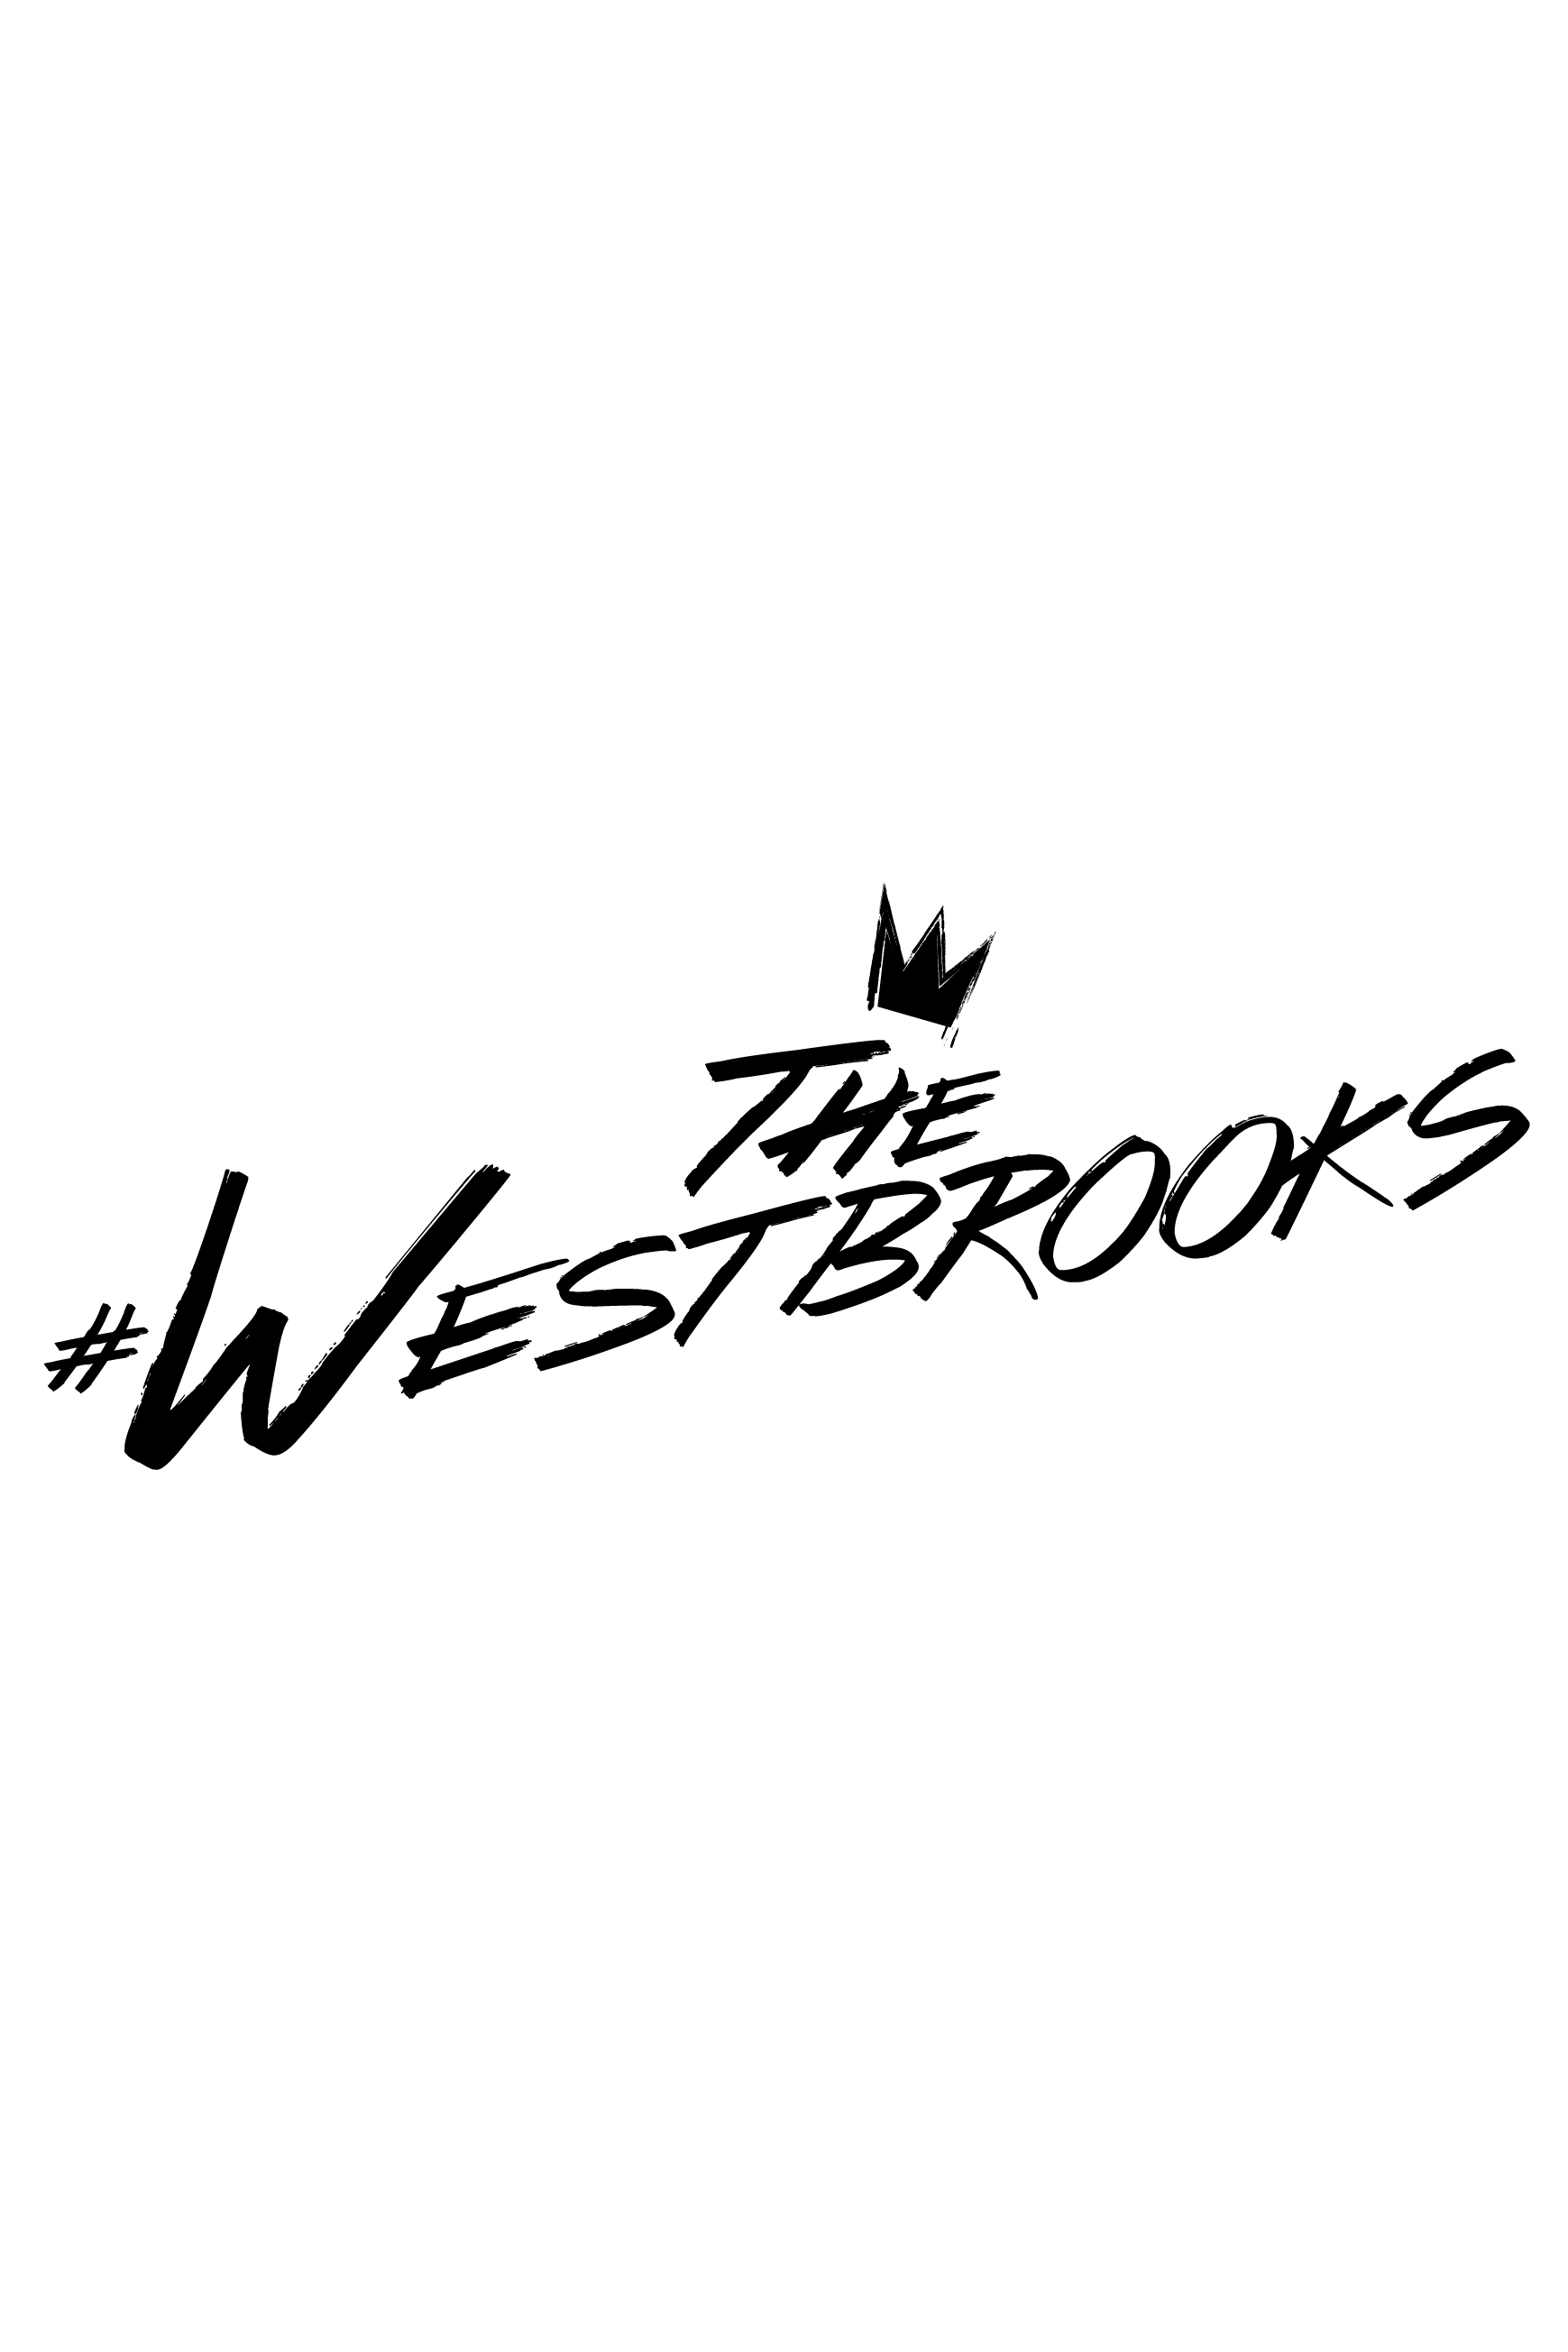 chloe castro recommends the westbrooks episode 5 pic